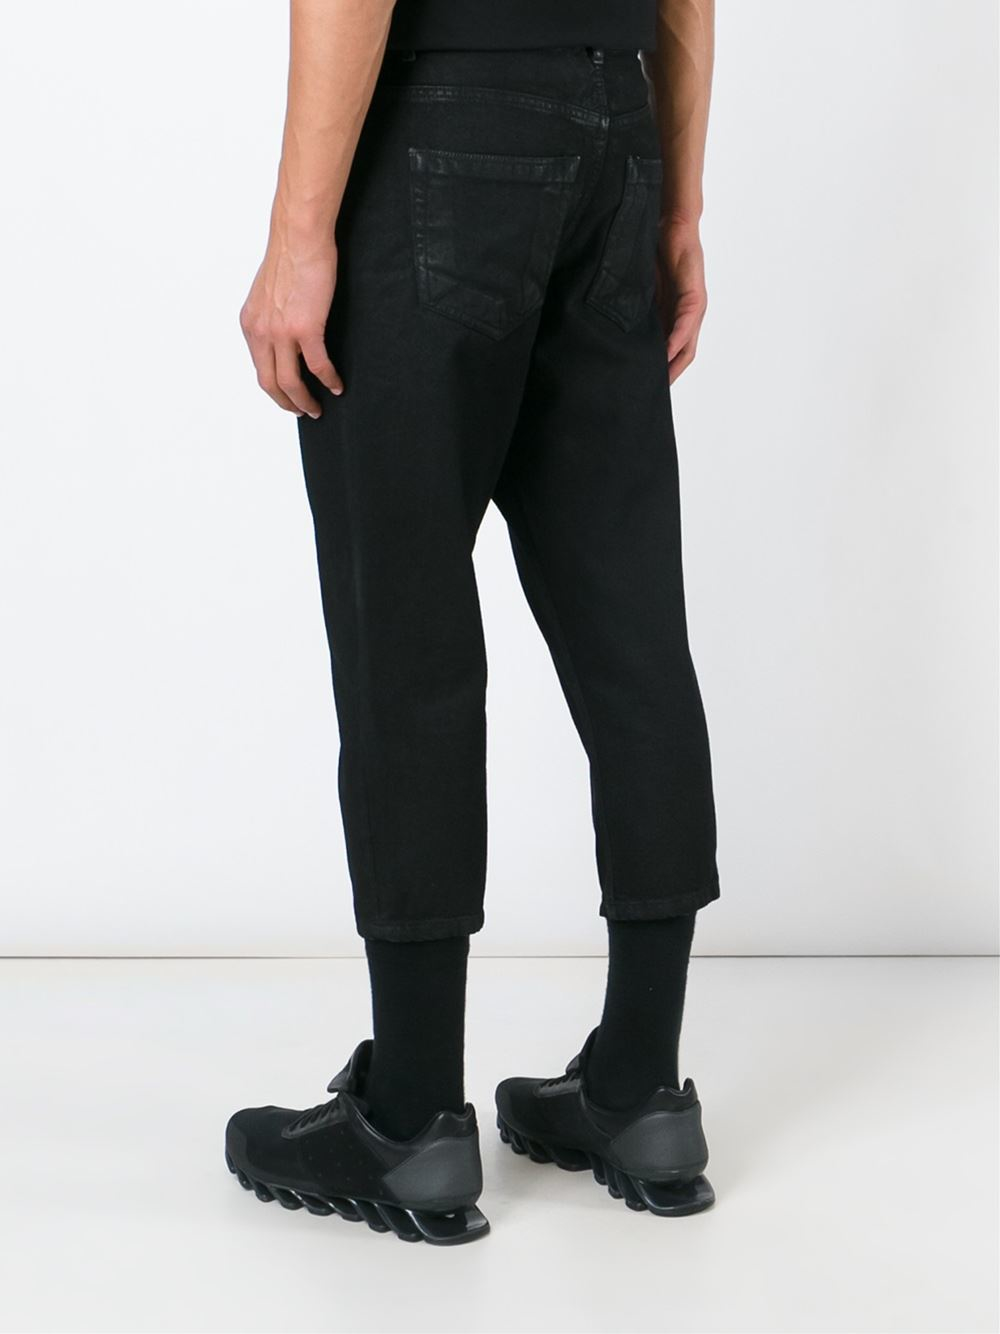 Lyst - DRKSHDW by Rick Owens Cropped Jeans in Black for Men